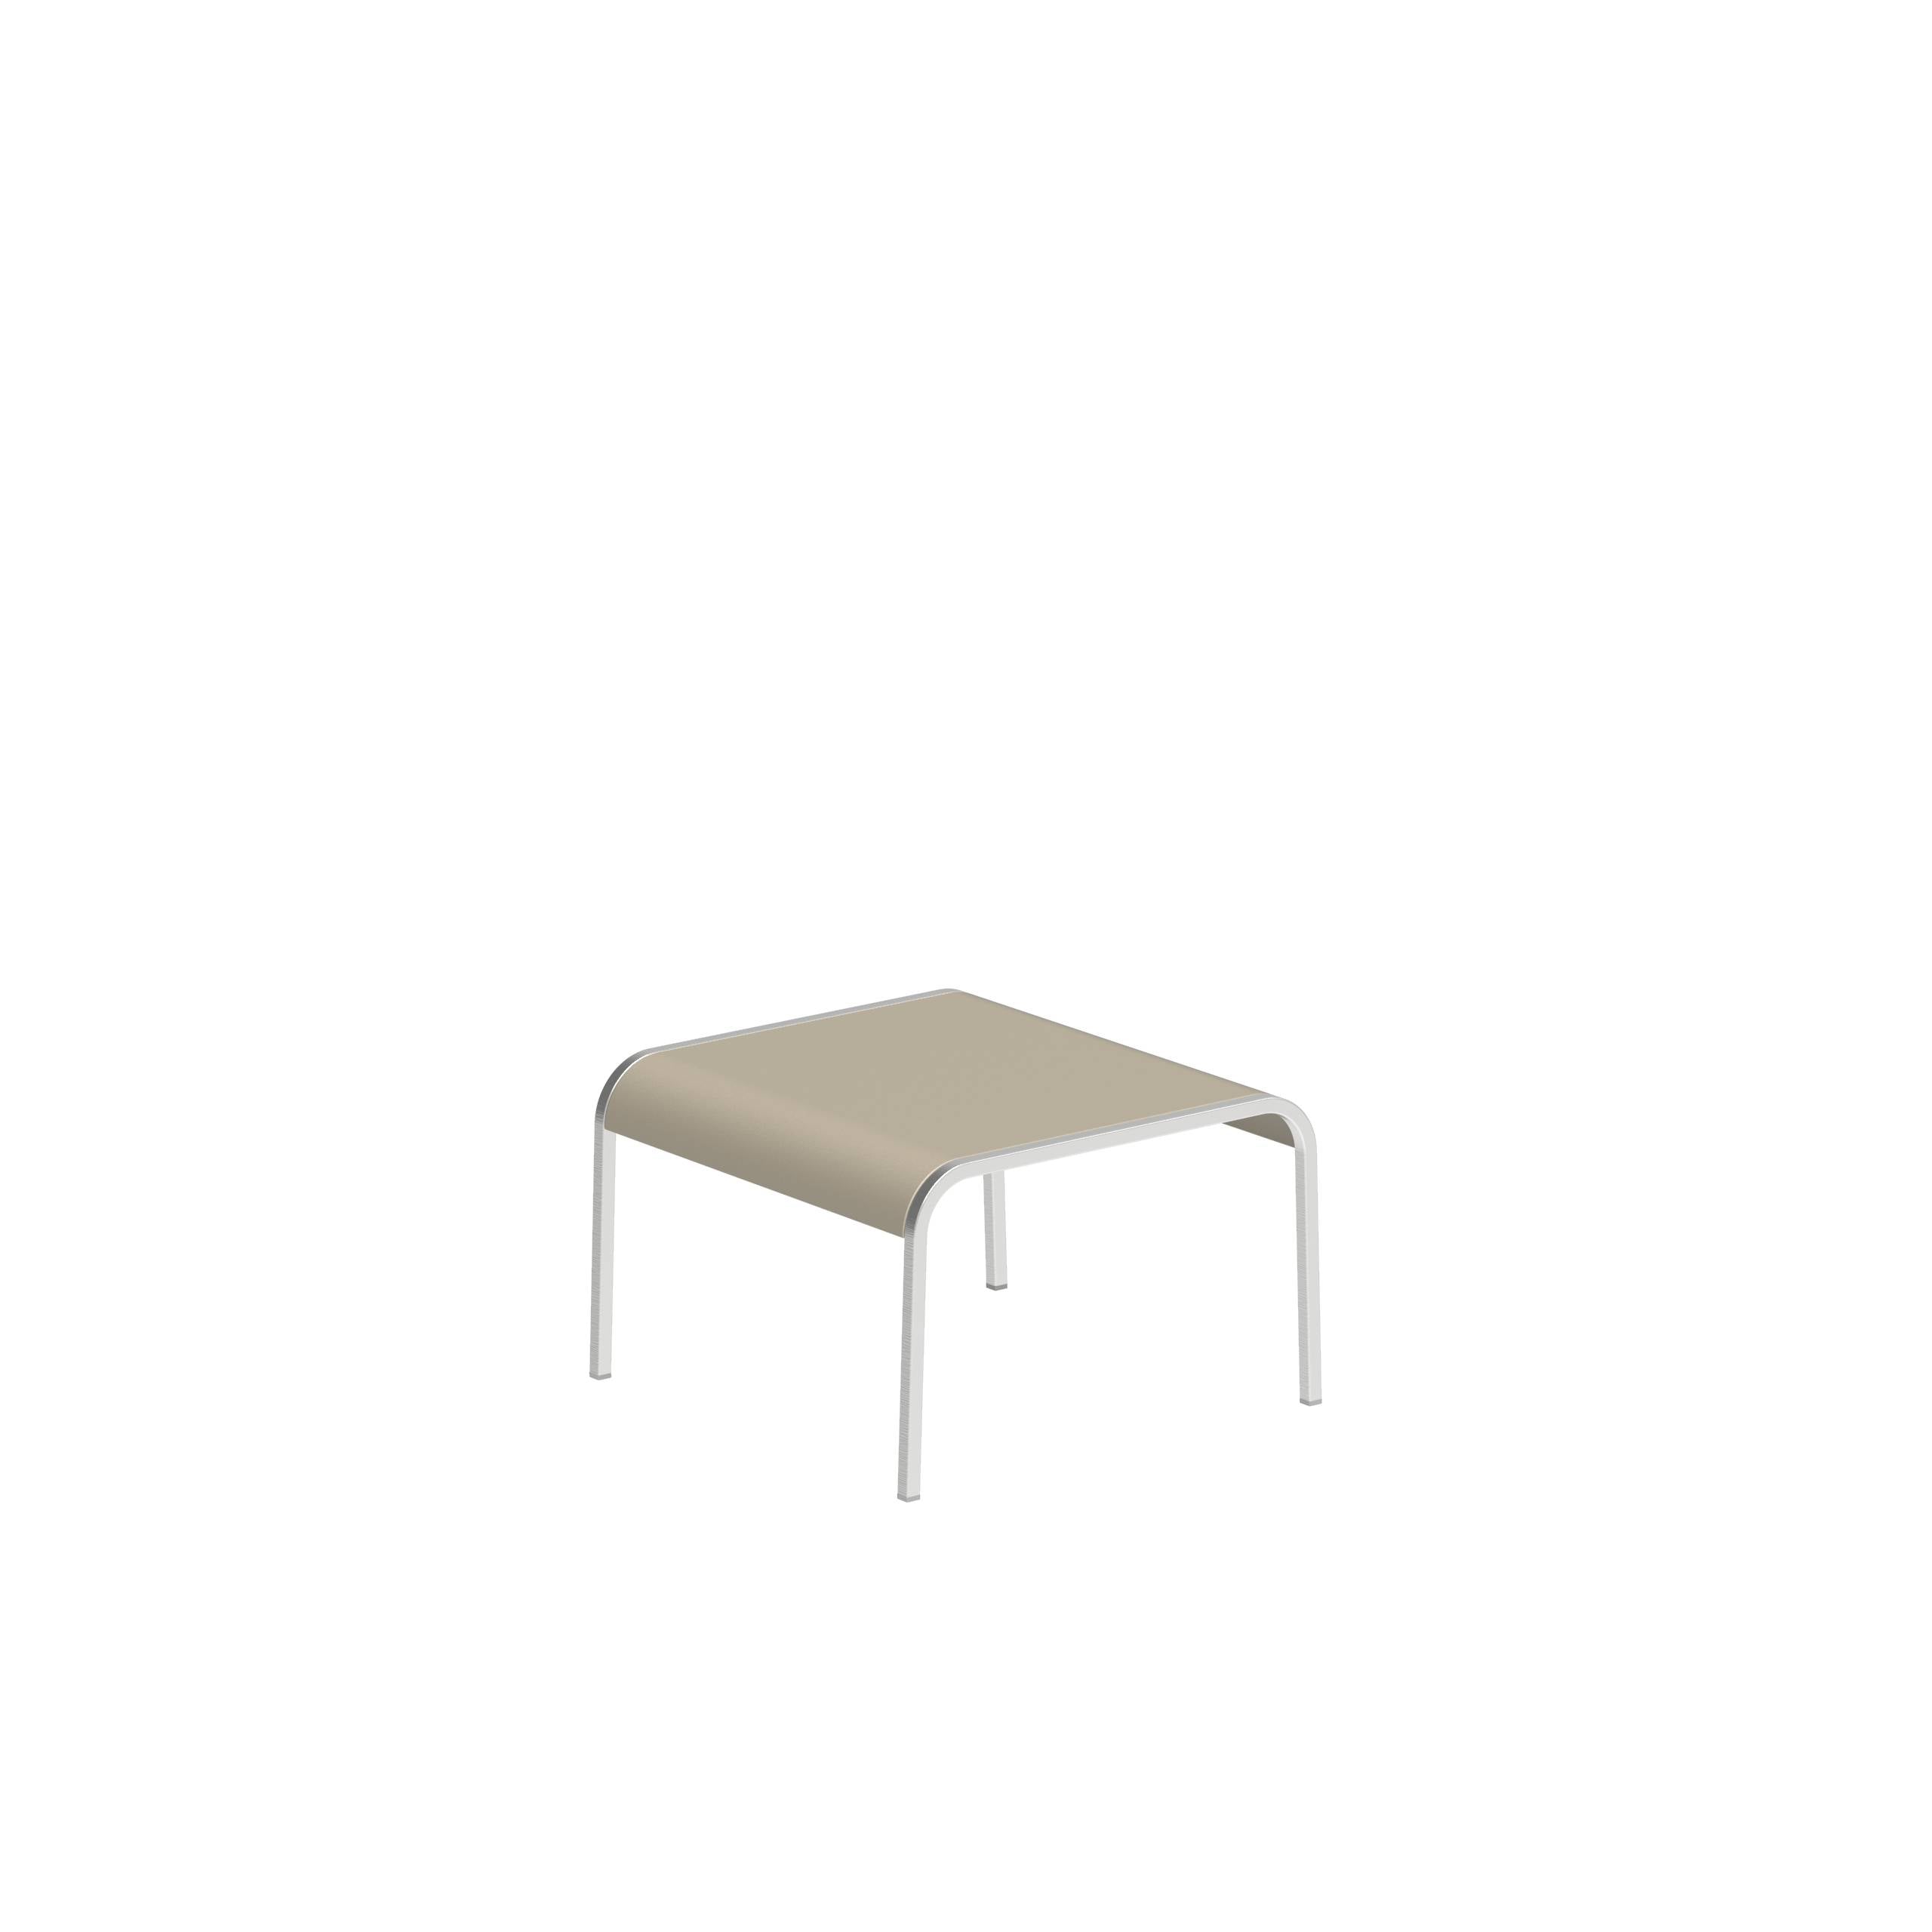 Qt50 Side Table 50x50cm With Alu Top Sand